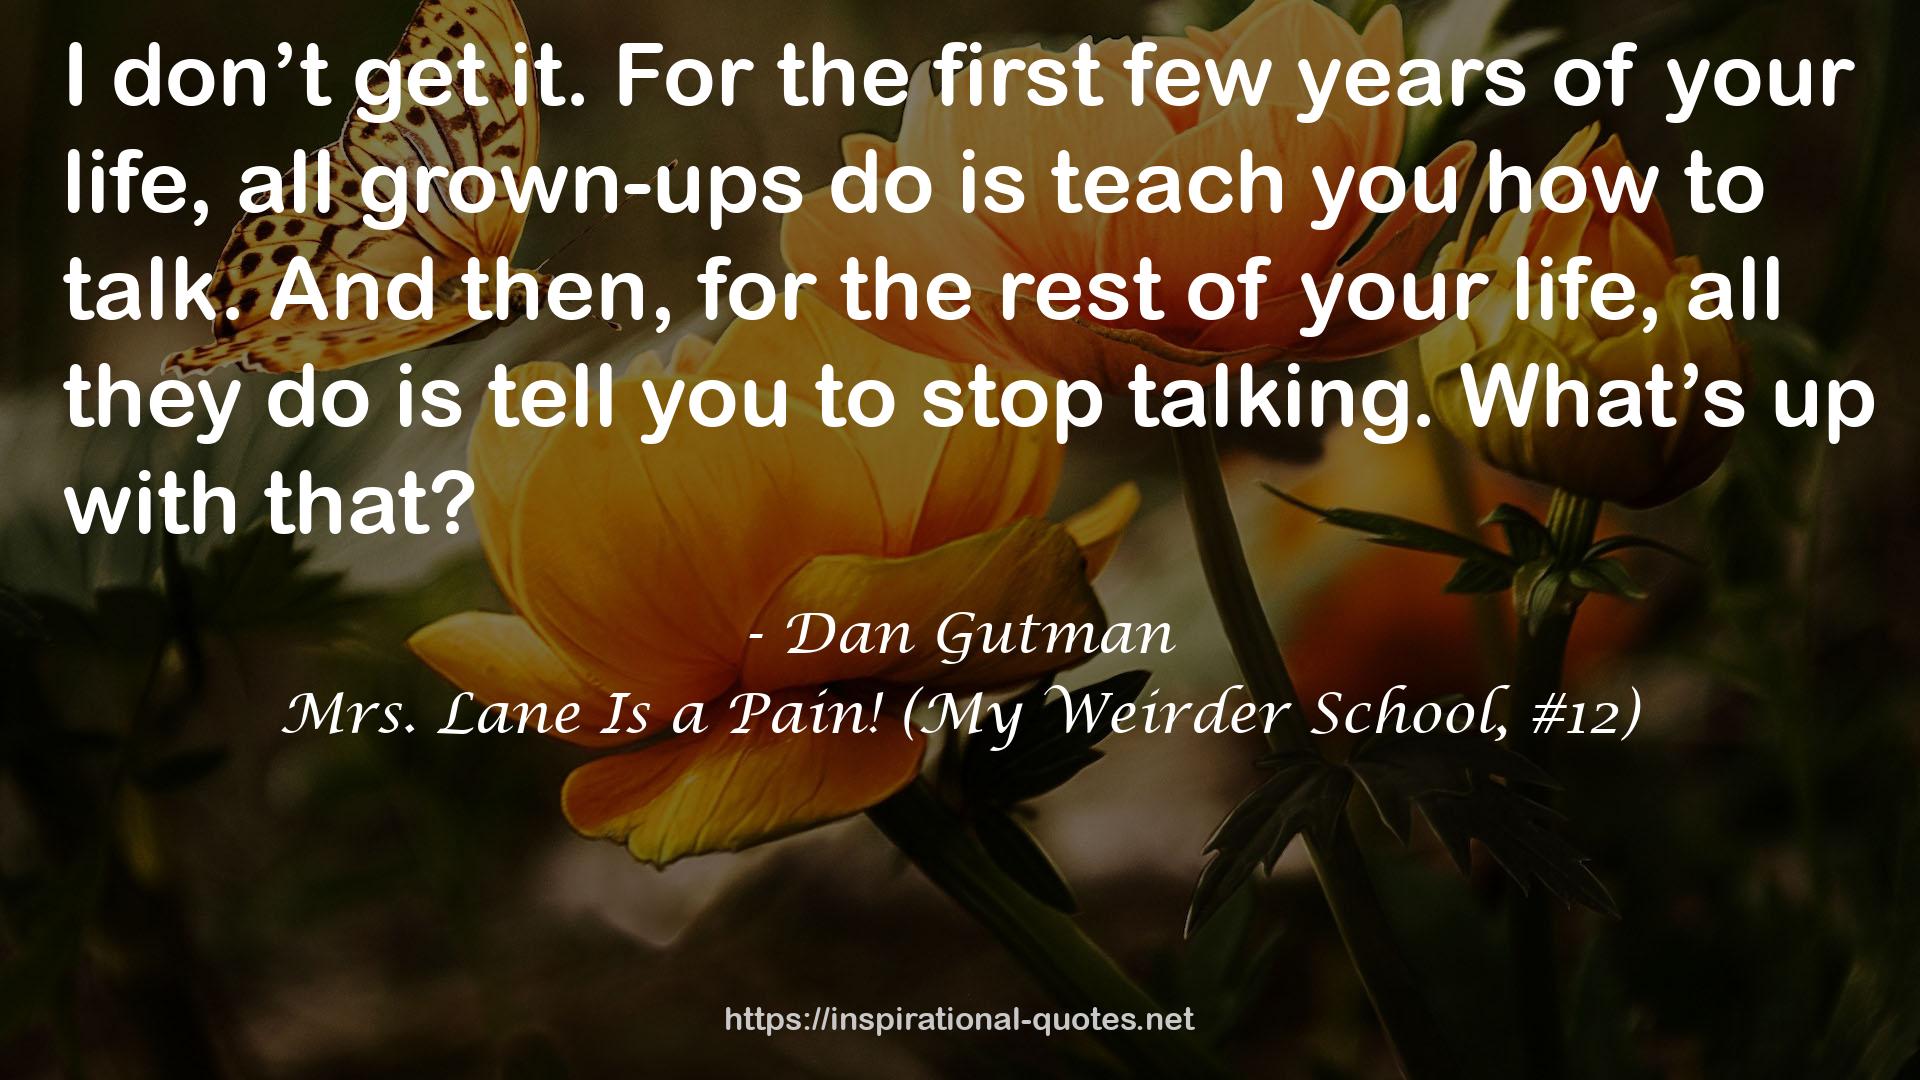 Mrs. Lane Is a Pain! (My Weirder School, #12) QUOTES